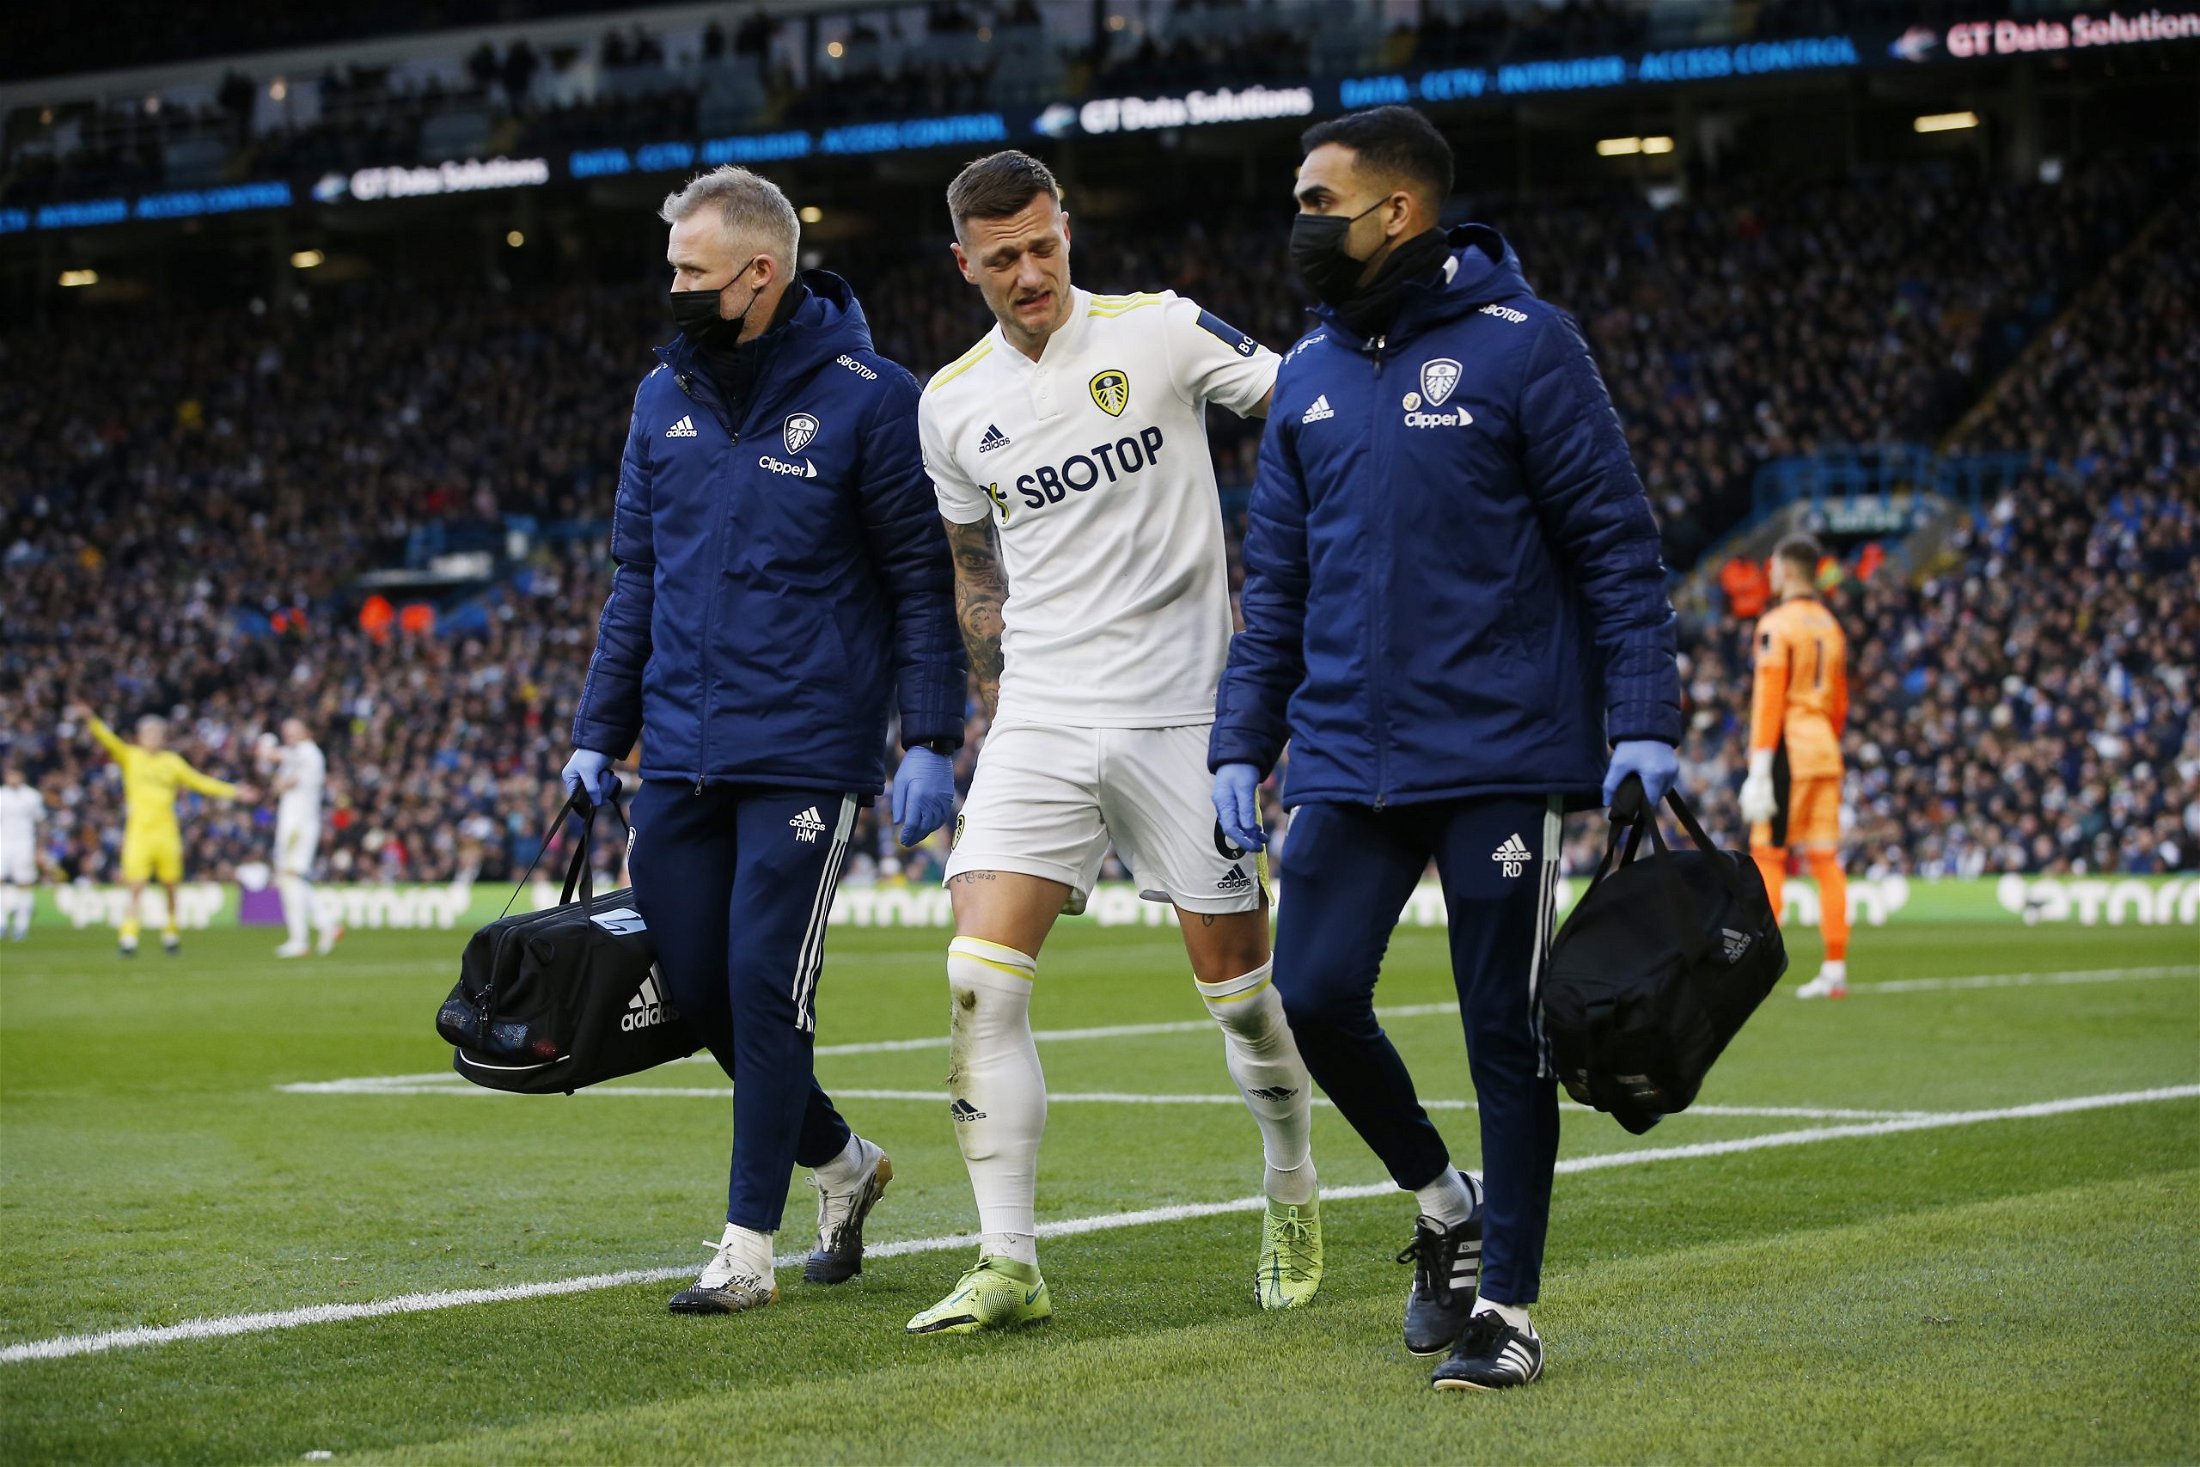  Revealed: Leeds United drop timely double injury update as Aston Villa clash nears